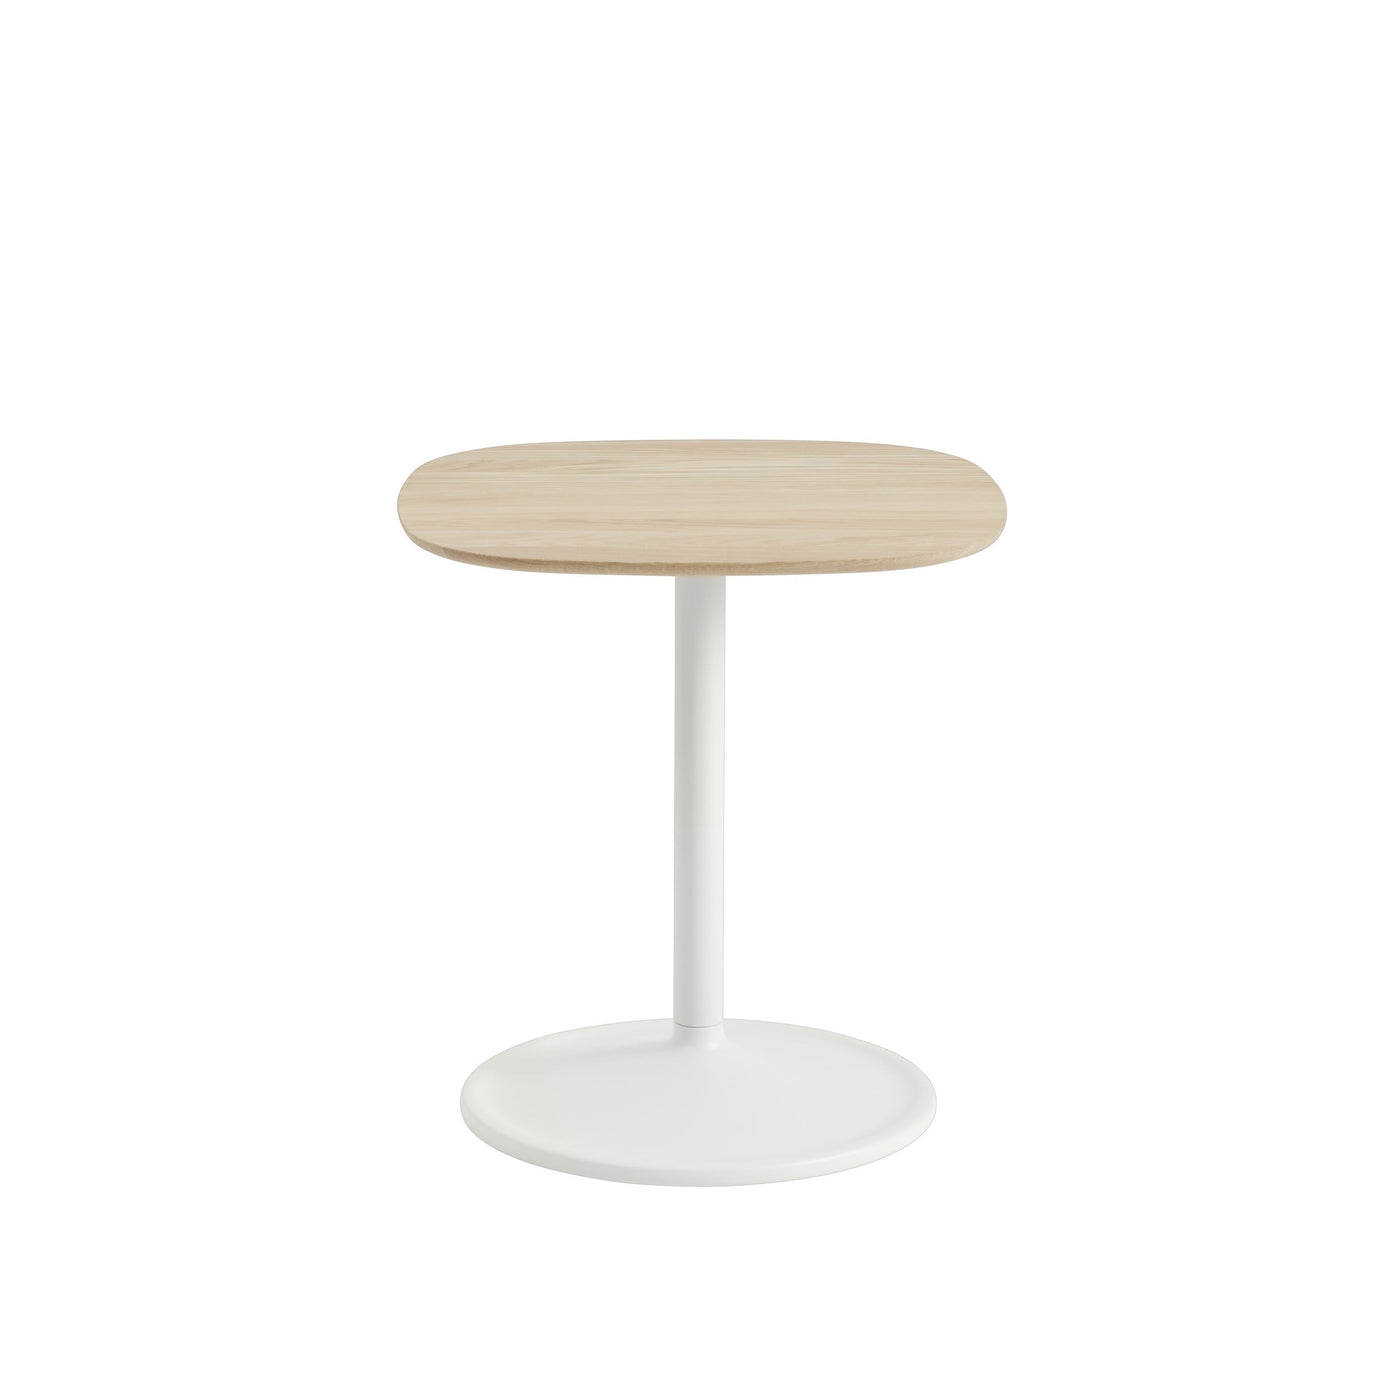 Muuto Soft side table Ø45 x 48cm high. Shop online at someday designs. #colour_solid-oak-off-white